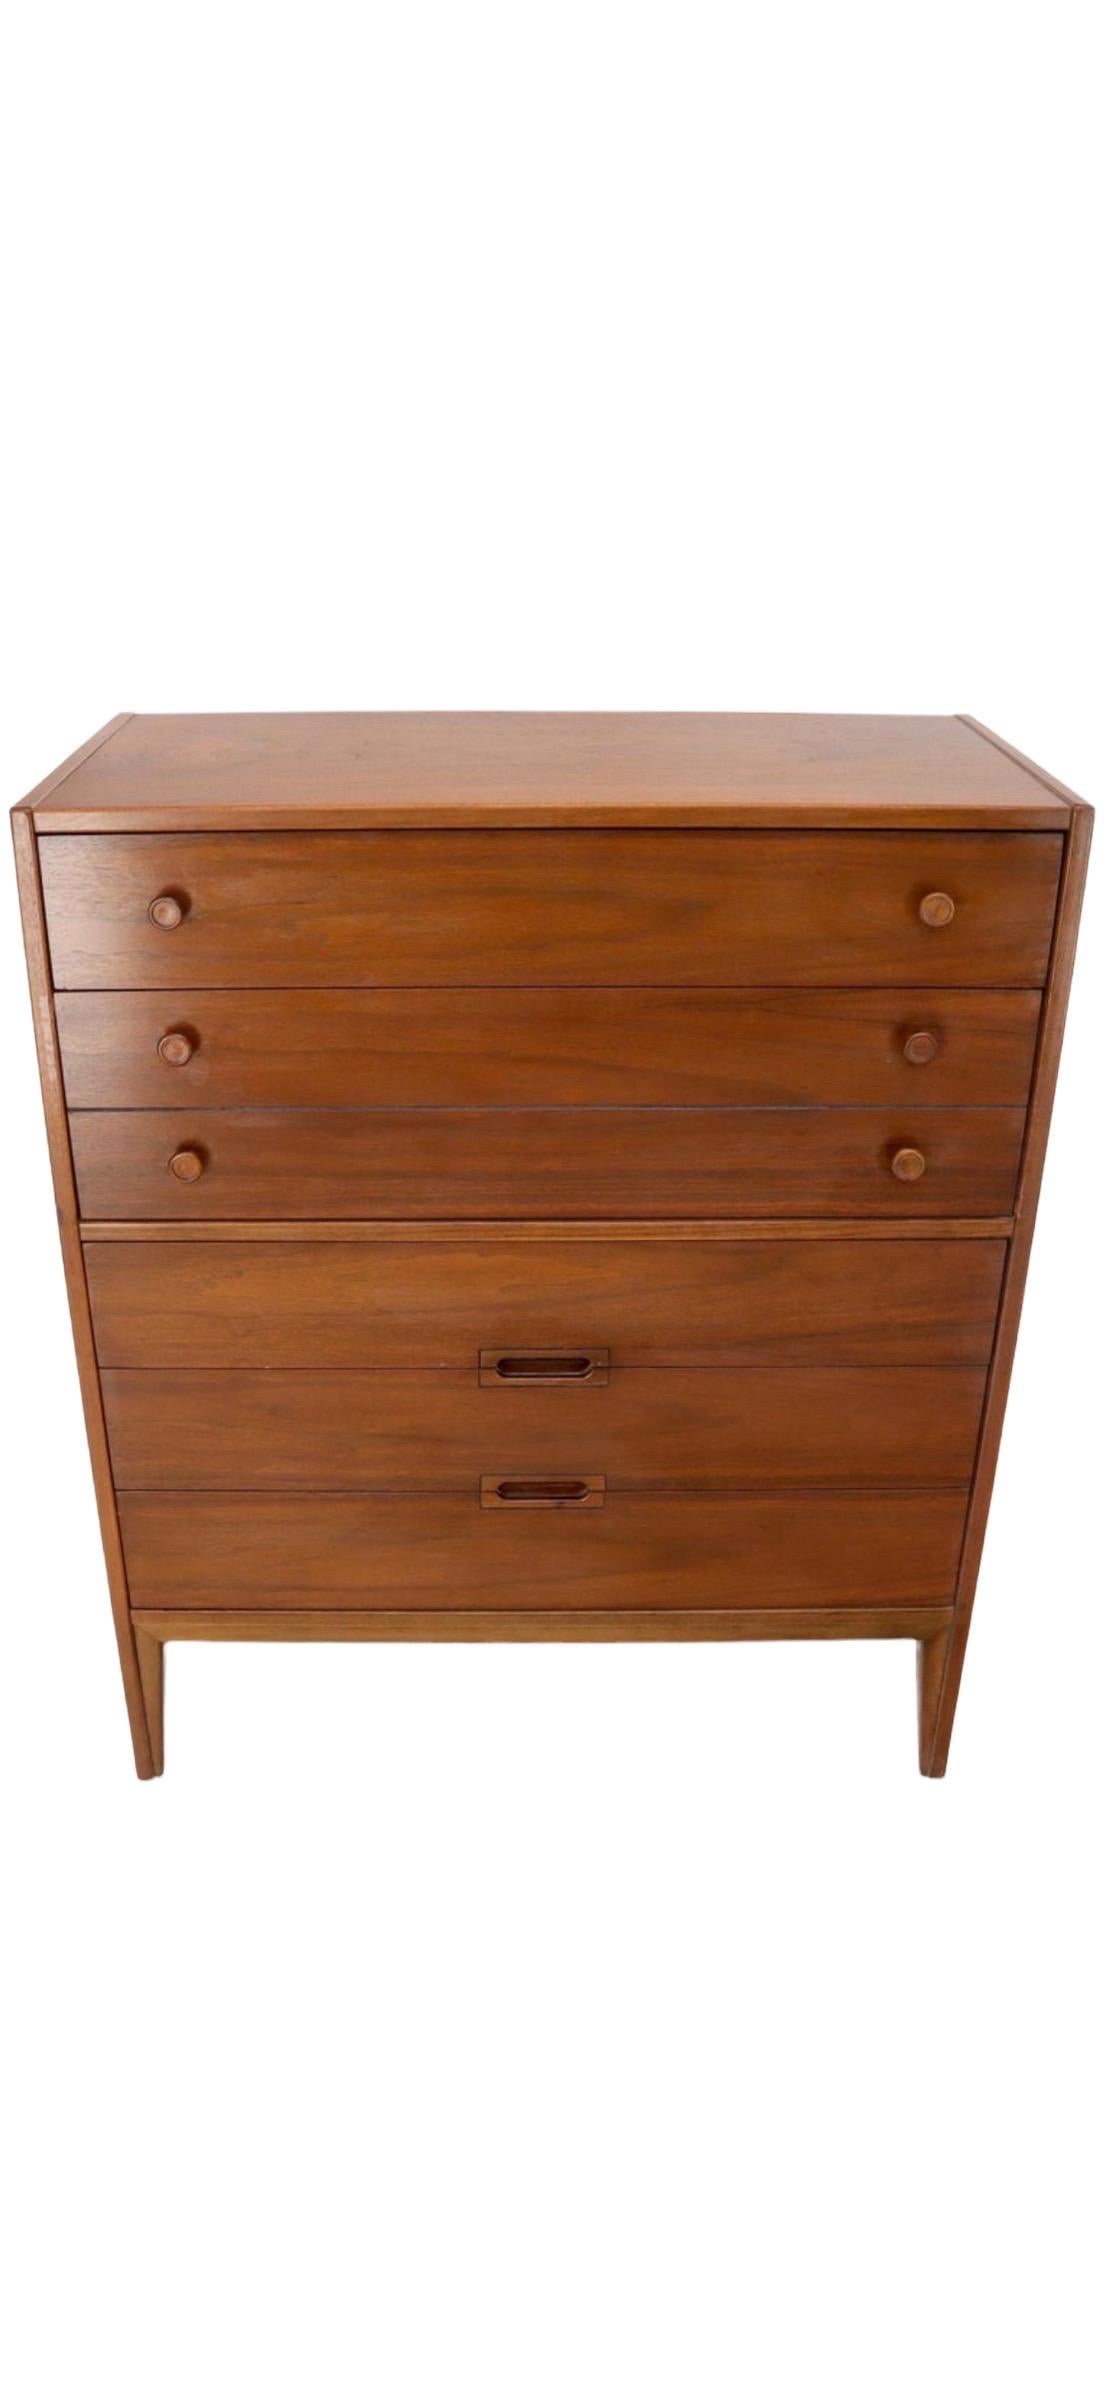 Walnut Mid-Century Modern Five Drawers Dresser Cabinet In Good Condition For Sale In Seattle, WA